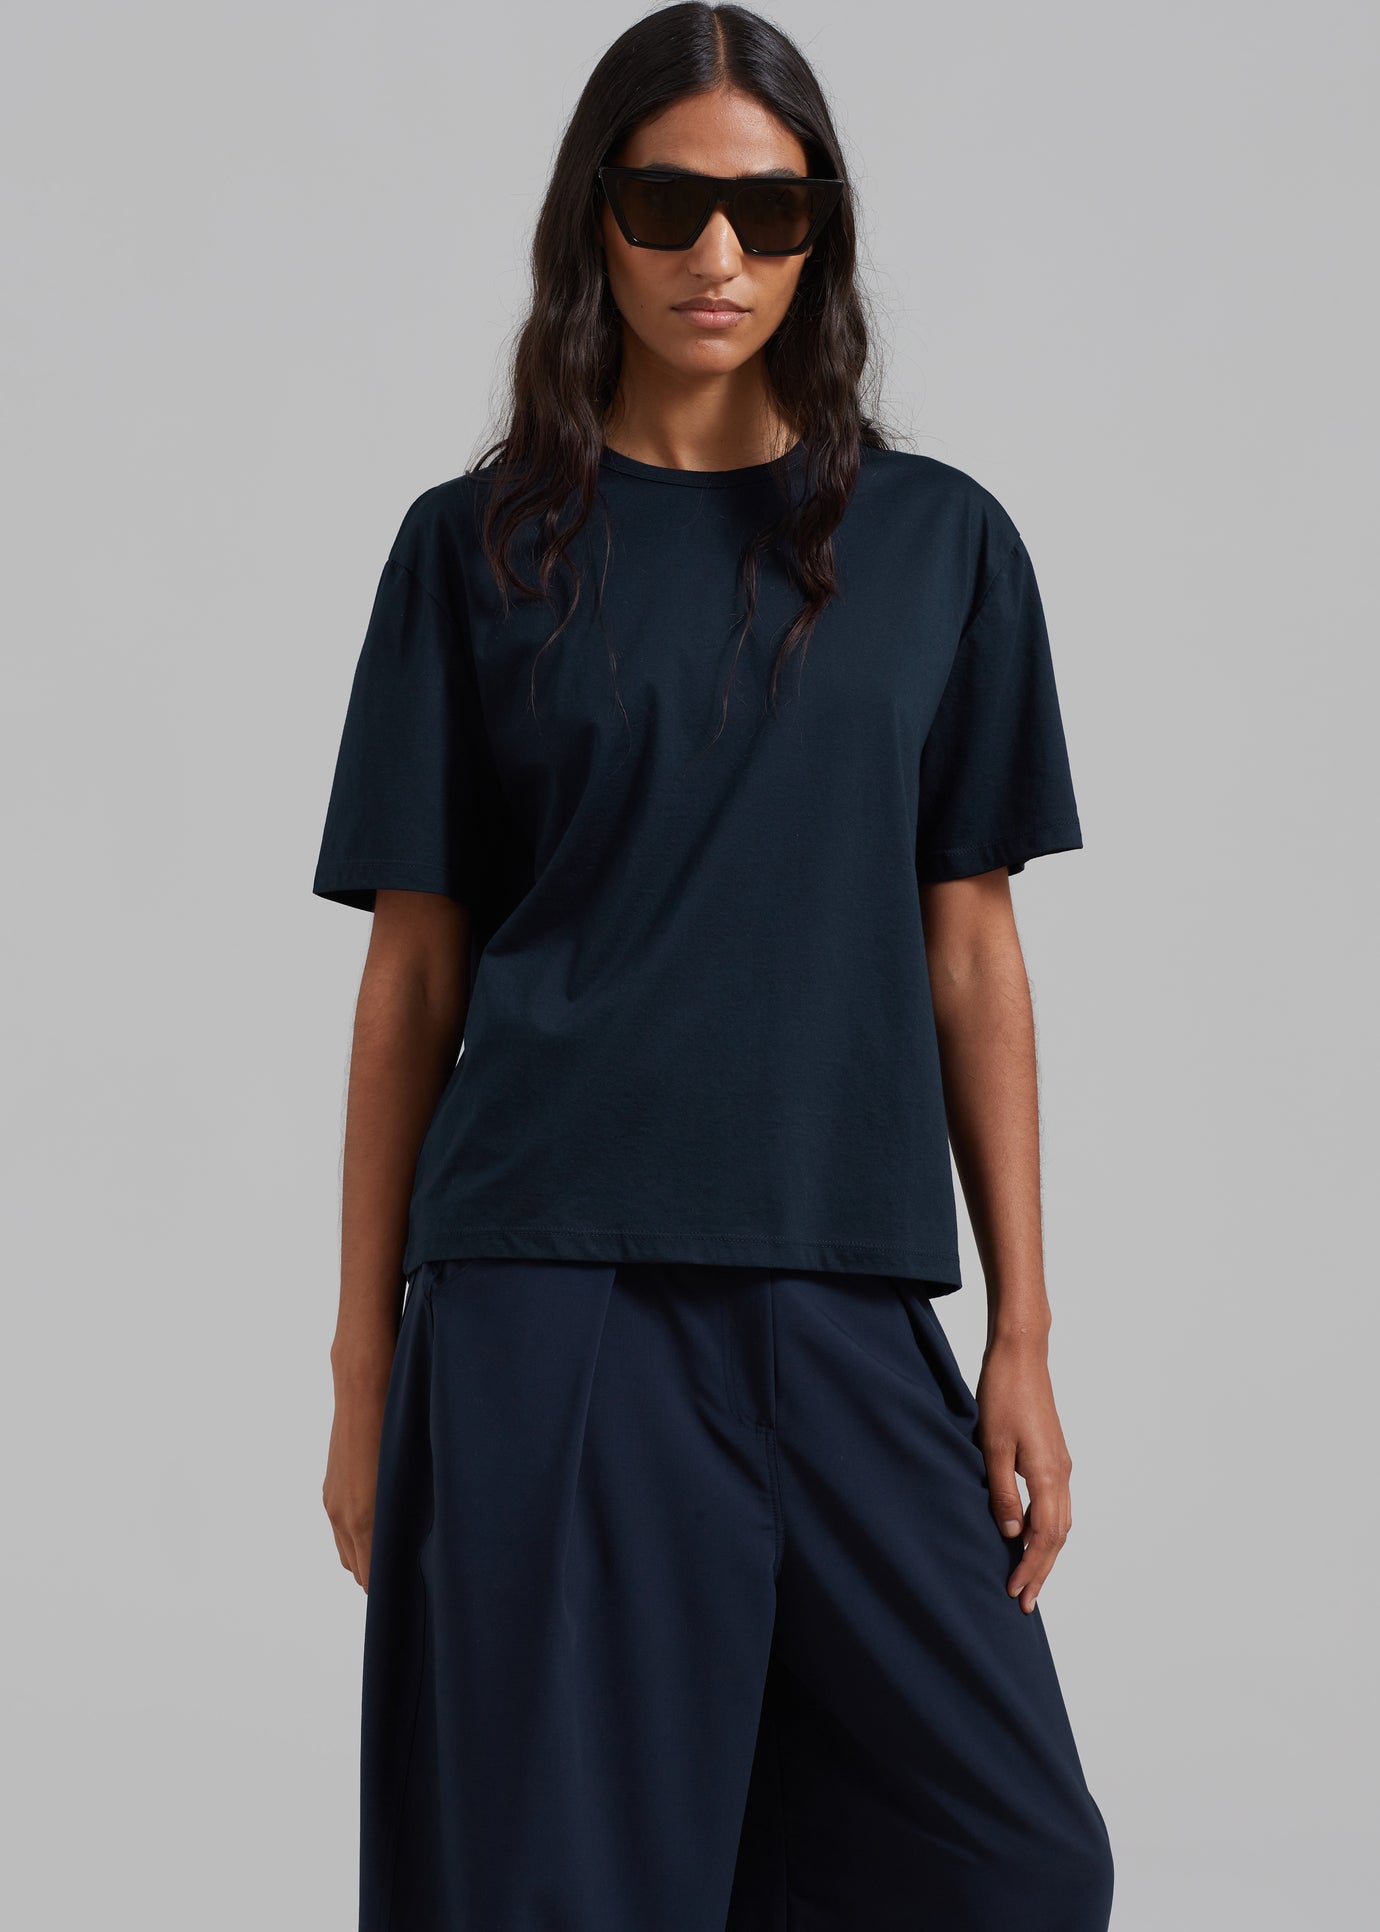 Connell Boxy Tee - Navy - 1